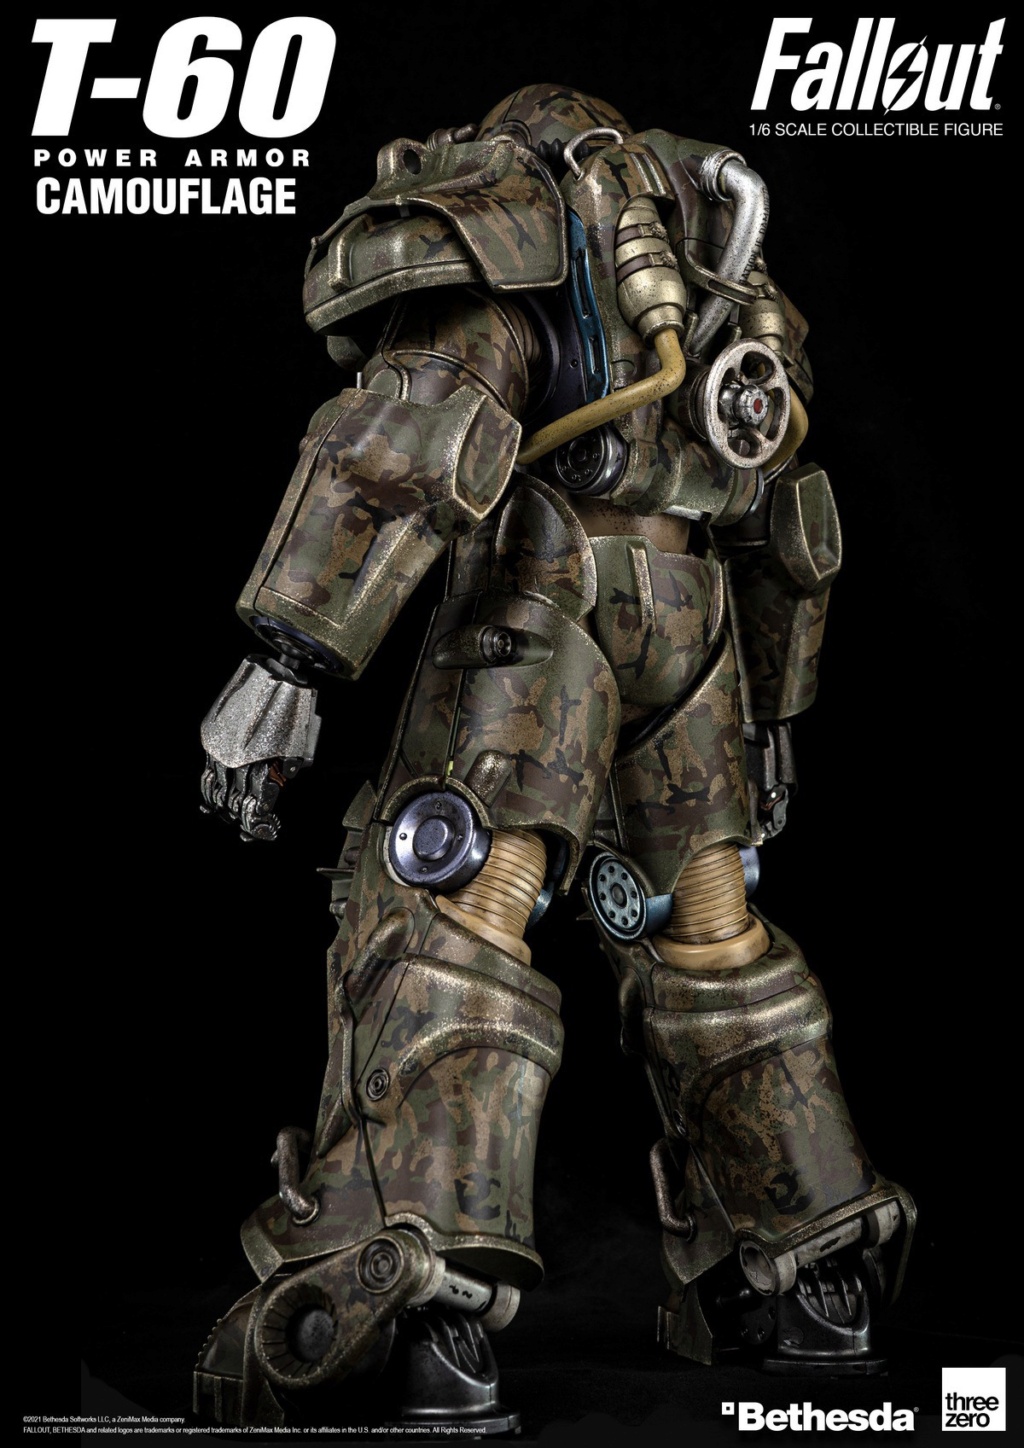 FallOut - NEW PRODUCT: Threezero: 1/6 Fallout: Remaining Dust/Radiation Series-T-60 Power Armor Action Figure 0fb81f10